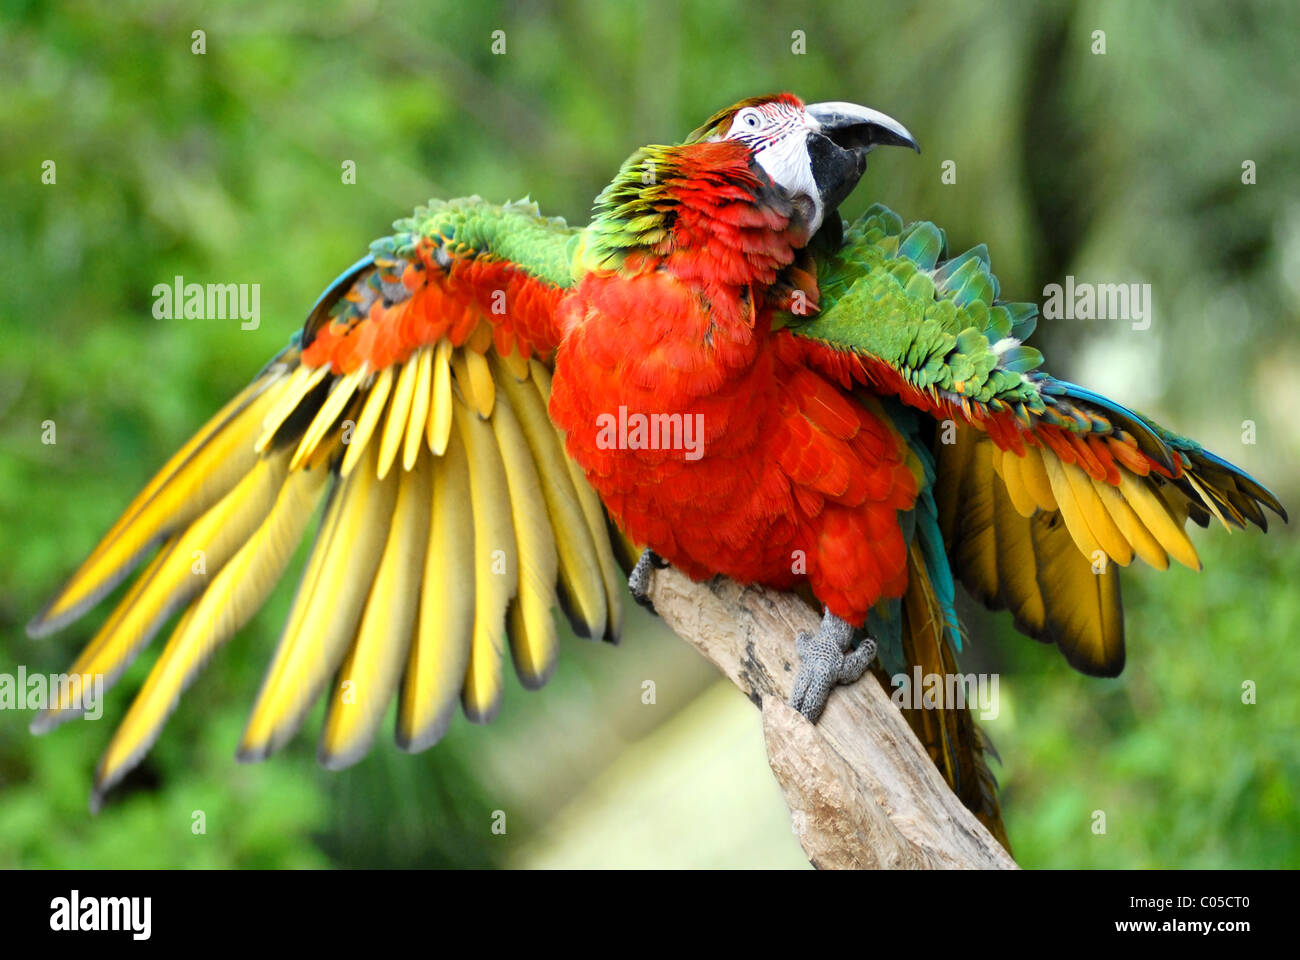 Closeup of red-and-green Macaw (Ara chloropterus) on perch outspread wings Stock Photo